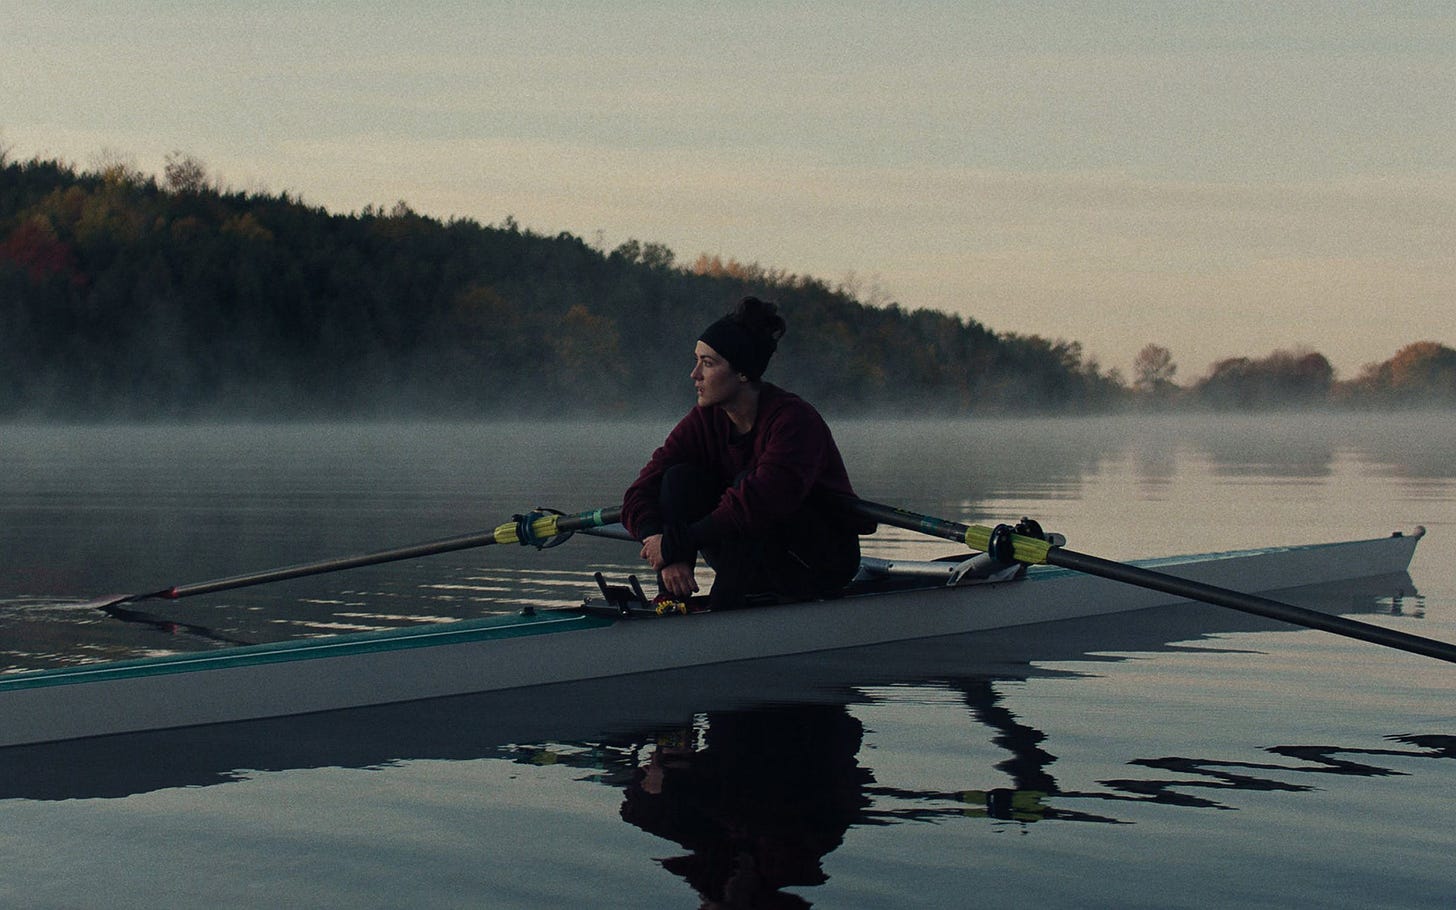 A white woman looks off into the distance as she sits with her arms draped over her legs in a rowing scull on a misty lake in the early morning.